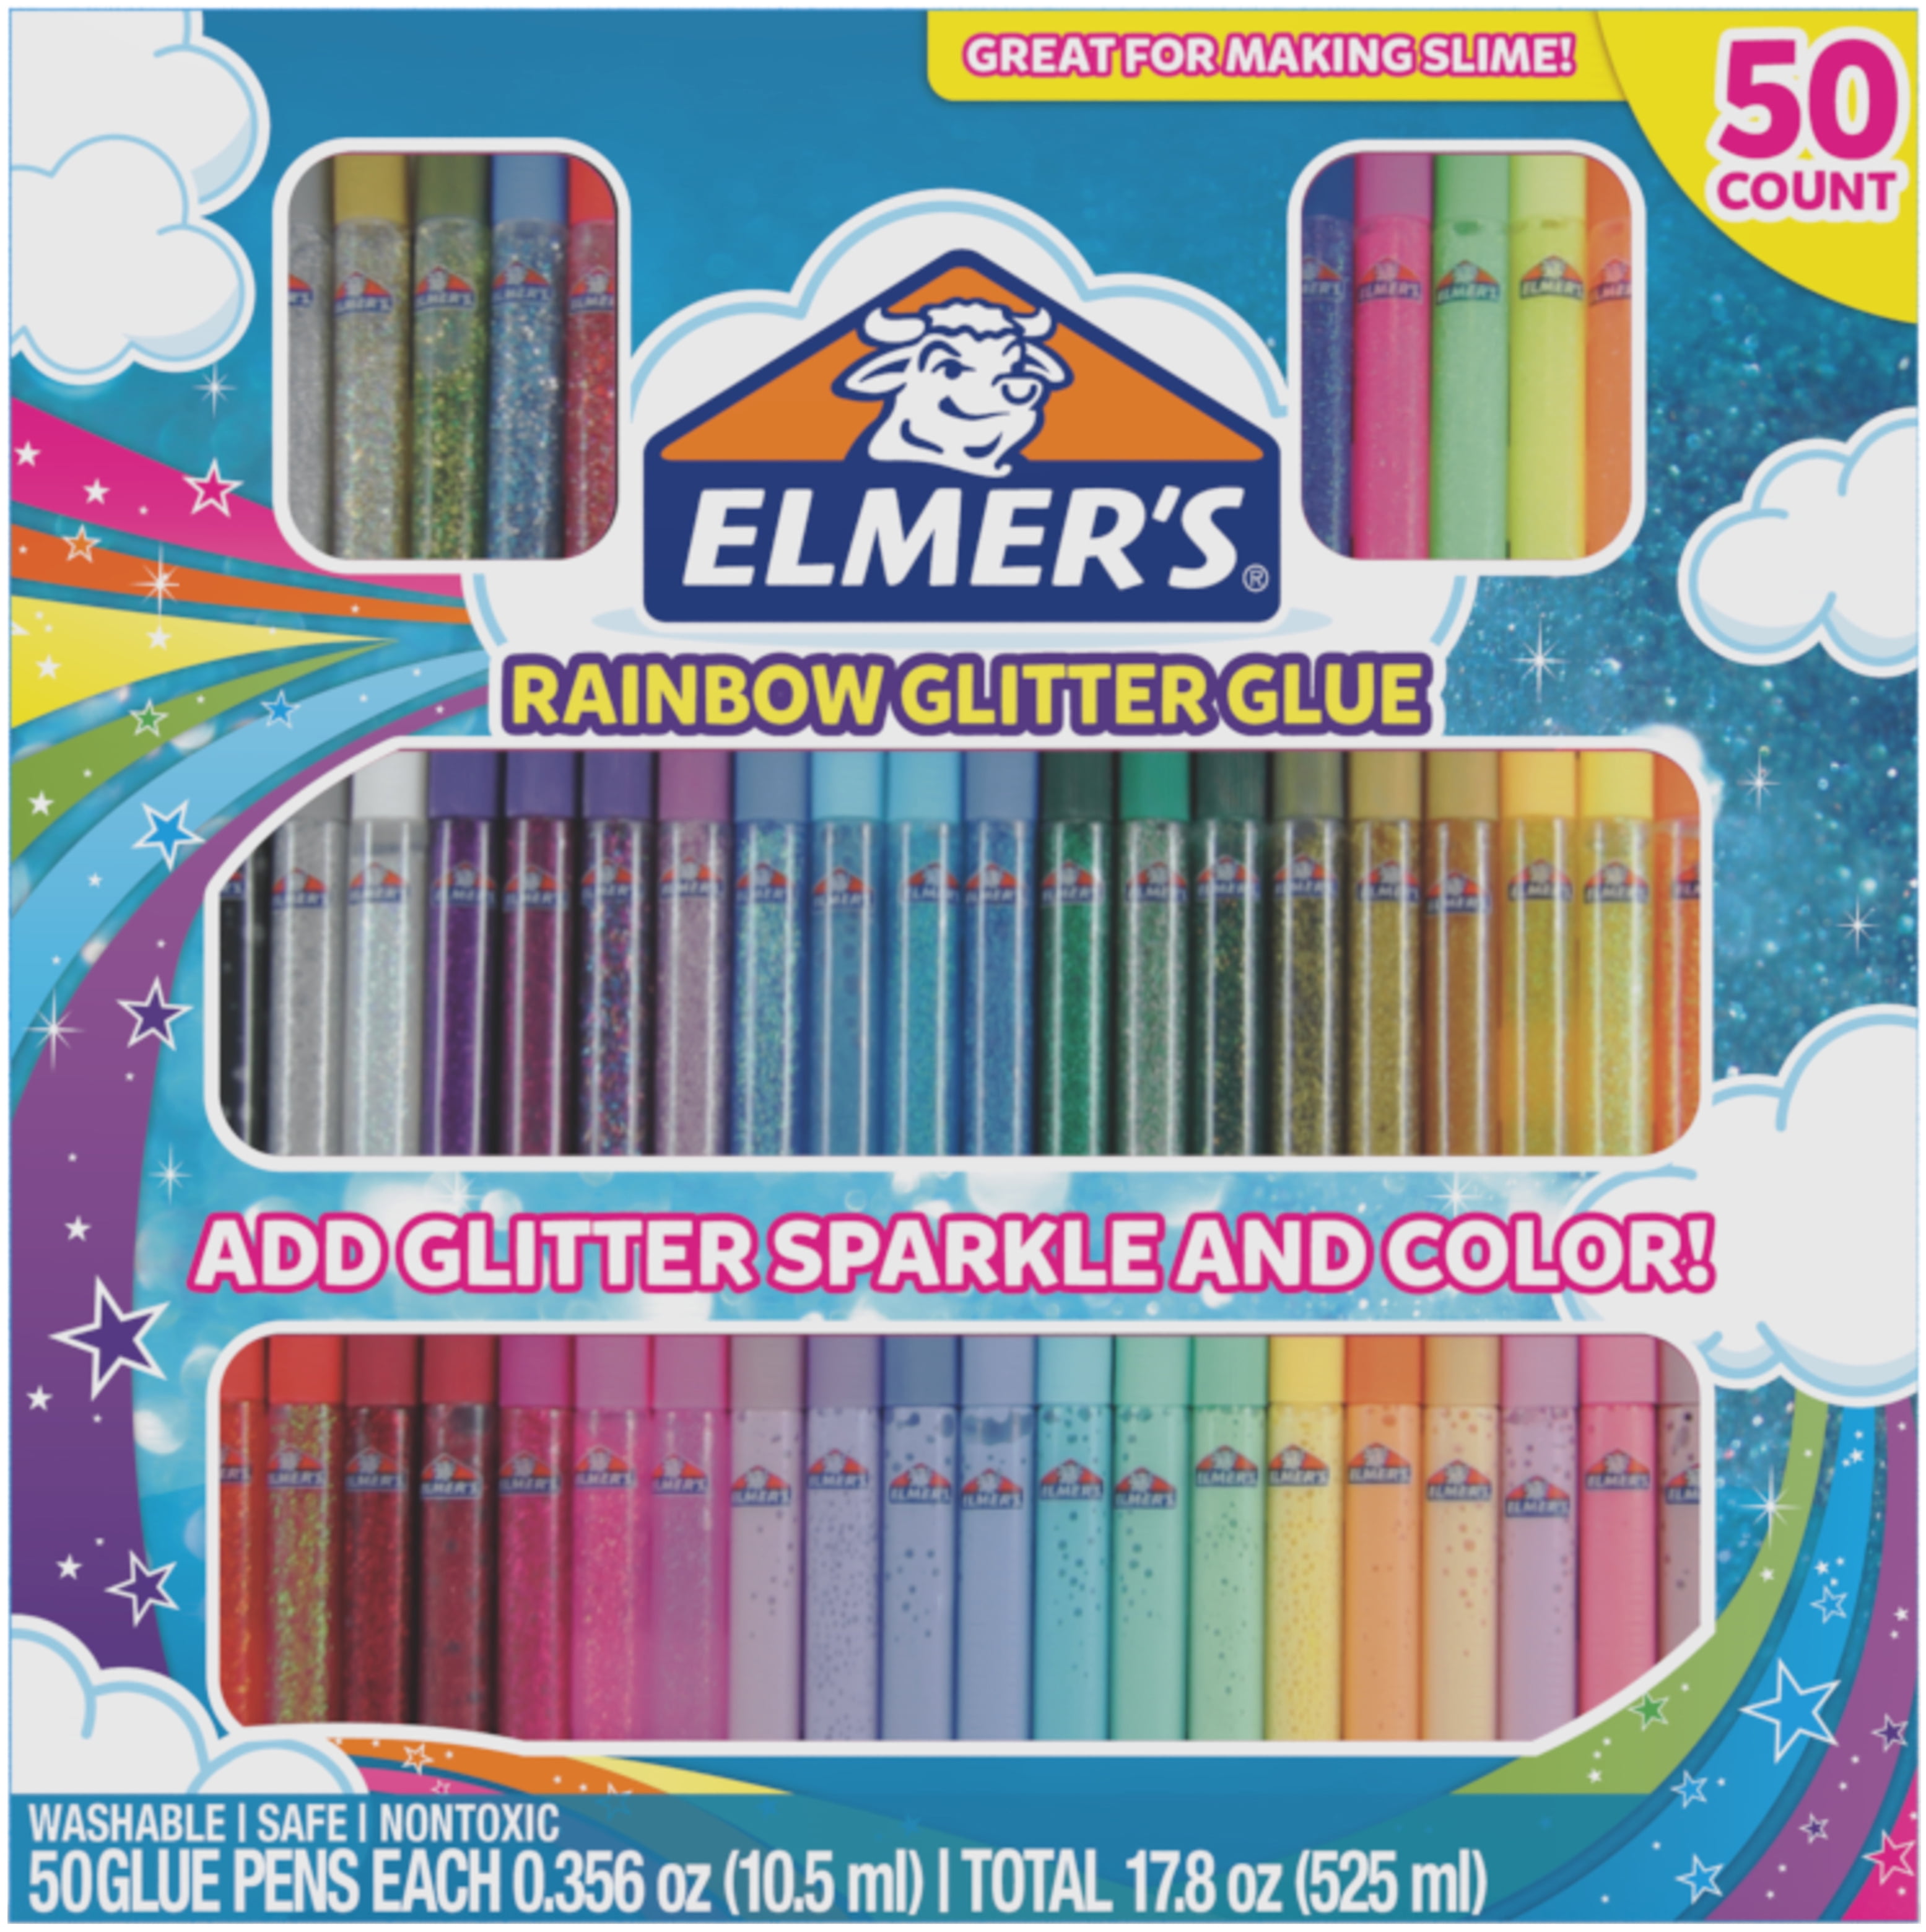  Zugar Land Sparkle Glitter Fun #2 Lead 7.5 Pencils (12 Pack)  6 Glitter Colors: Yellow, Red, Pink, Green, Blue and Orange! (12) : Office  Products